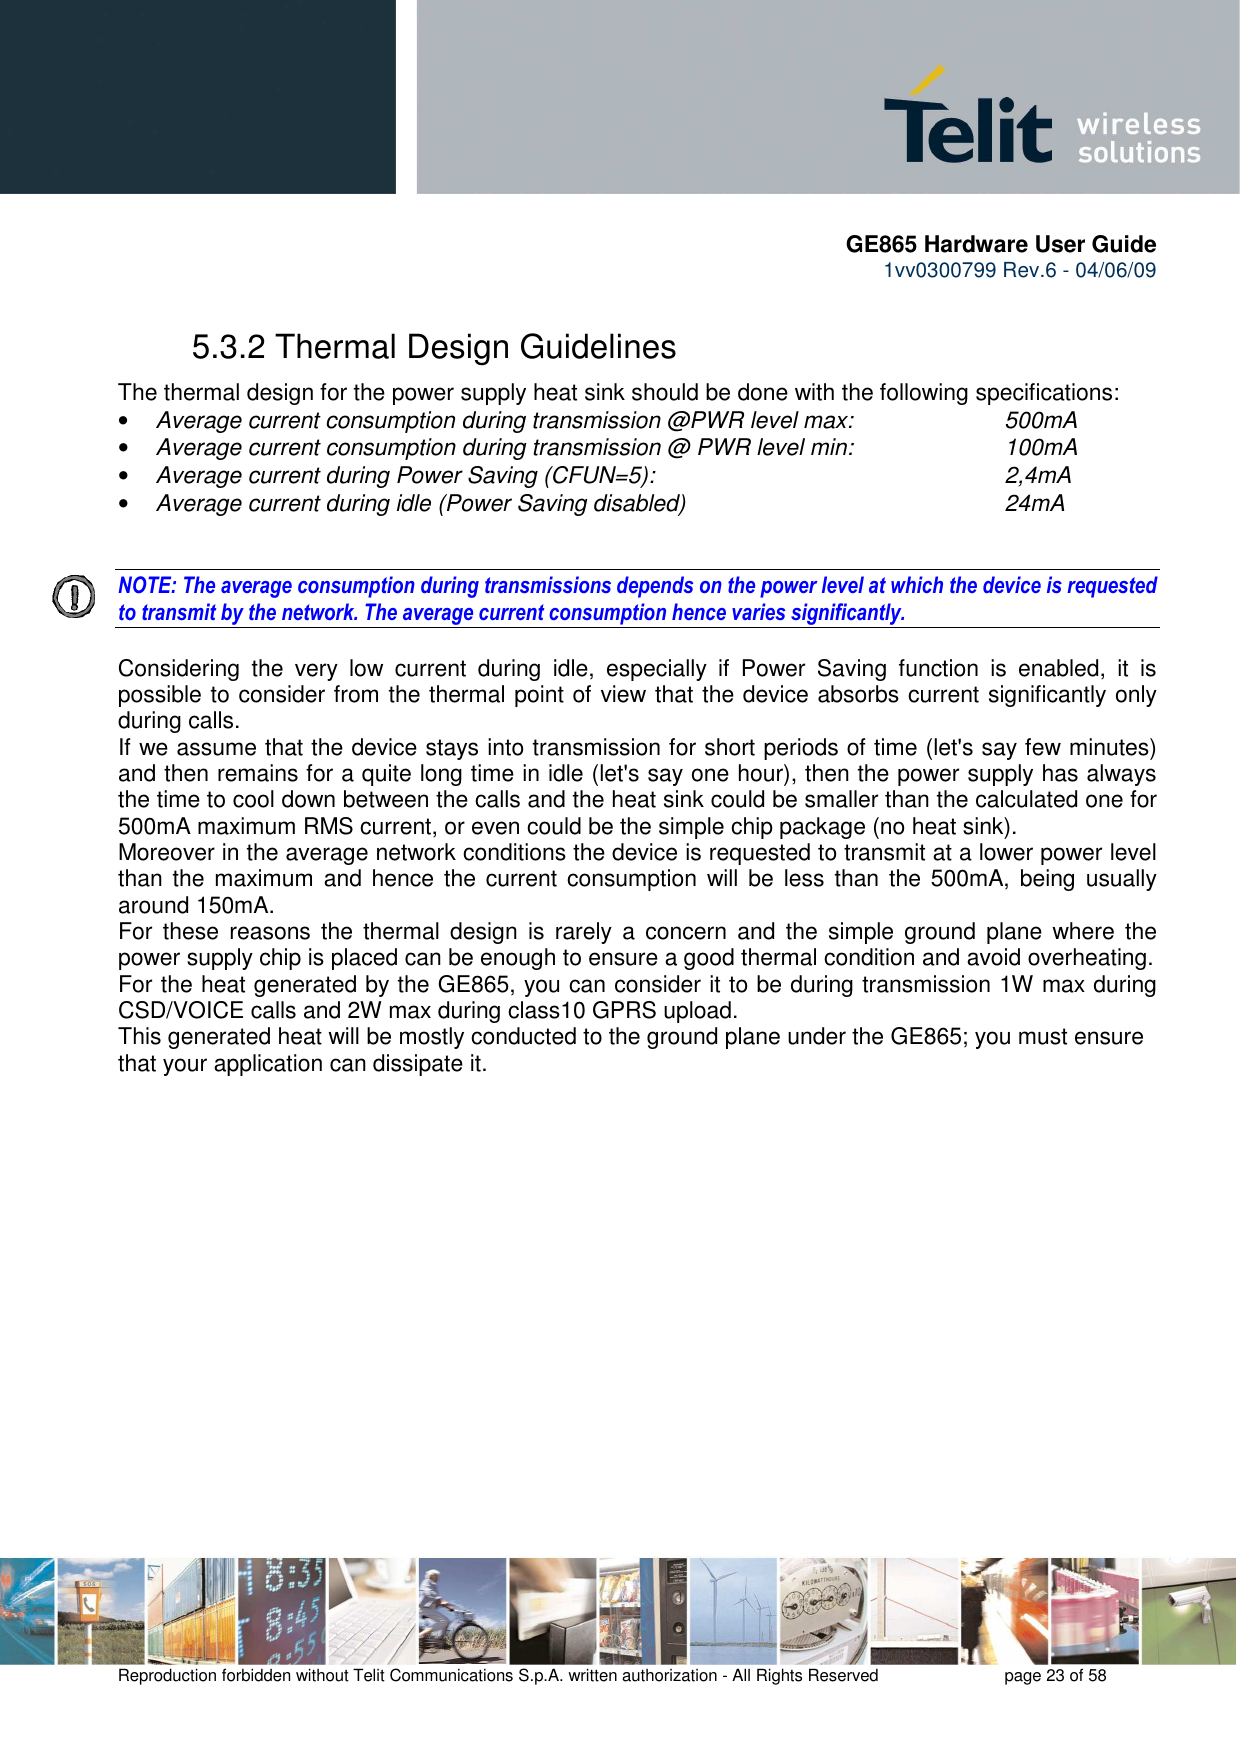       GE865 Hardware User Guide 1vv0300799 Rev.6 - 04/06/09      Reproduction forbidden without Telit Communications S.p.A. written authorization - All Rights Reserved    page 23 of 58  5.3.2 Thermal Design Guidelines The thermal design for the power supply heat sink should be done with the following specifications: • Average current consumption during transmission @PWR level max:    500mA • Average current consumption during transmission @ PWR level min:    100mA  • Average current during Power Saving (CFUN=5):         2,4mA • Average current during idle (Power Saving disabled)        24mA   NOTE: The average consumption during transmissions depends on the power level at which the device is requested to transmit by the network. The average current consumption hence varies significantly.  Considering  the  very  low  current  during  idle,  especially  if  Power  Saving  function  is  enabled,  it  is possible to consider from the thermal point of view that the device absorbs current significantly only during calls.  If we assume that the device stays into transmission for short periods of time (let&apos;s say few minutes) and then remains for a quite long time in idle (let&apos;s say one hour), then the power supply has always the time to cool down between the calls and the heat sink could be smaller than the calculated one for 500mA maximum RMS current, or even could be the simple chip package (no heat sink). Moreover in the average network conditions the device is requested to transmit at a lower power level than the maximum  and hence the current consumption will  be  less  than the 500mA, being usually around 150mA. For  these  reasons  the  thermal  design  is  rarely  a  concern  and  the  simple  ground  plane  where  the power supply chip is placed can be enough to ensure a good thermal condition and avoid overheating.  For the heat generated by the GE865, you can consider it to be during transmission 1W max during CSD/VOICE calls and 2W max during class10 GPRS upload.  This generated heat will be mostly conducted to the ground plane under the GE865; you must ensure that your application can dissipate it.   